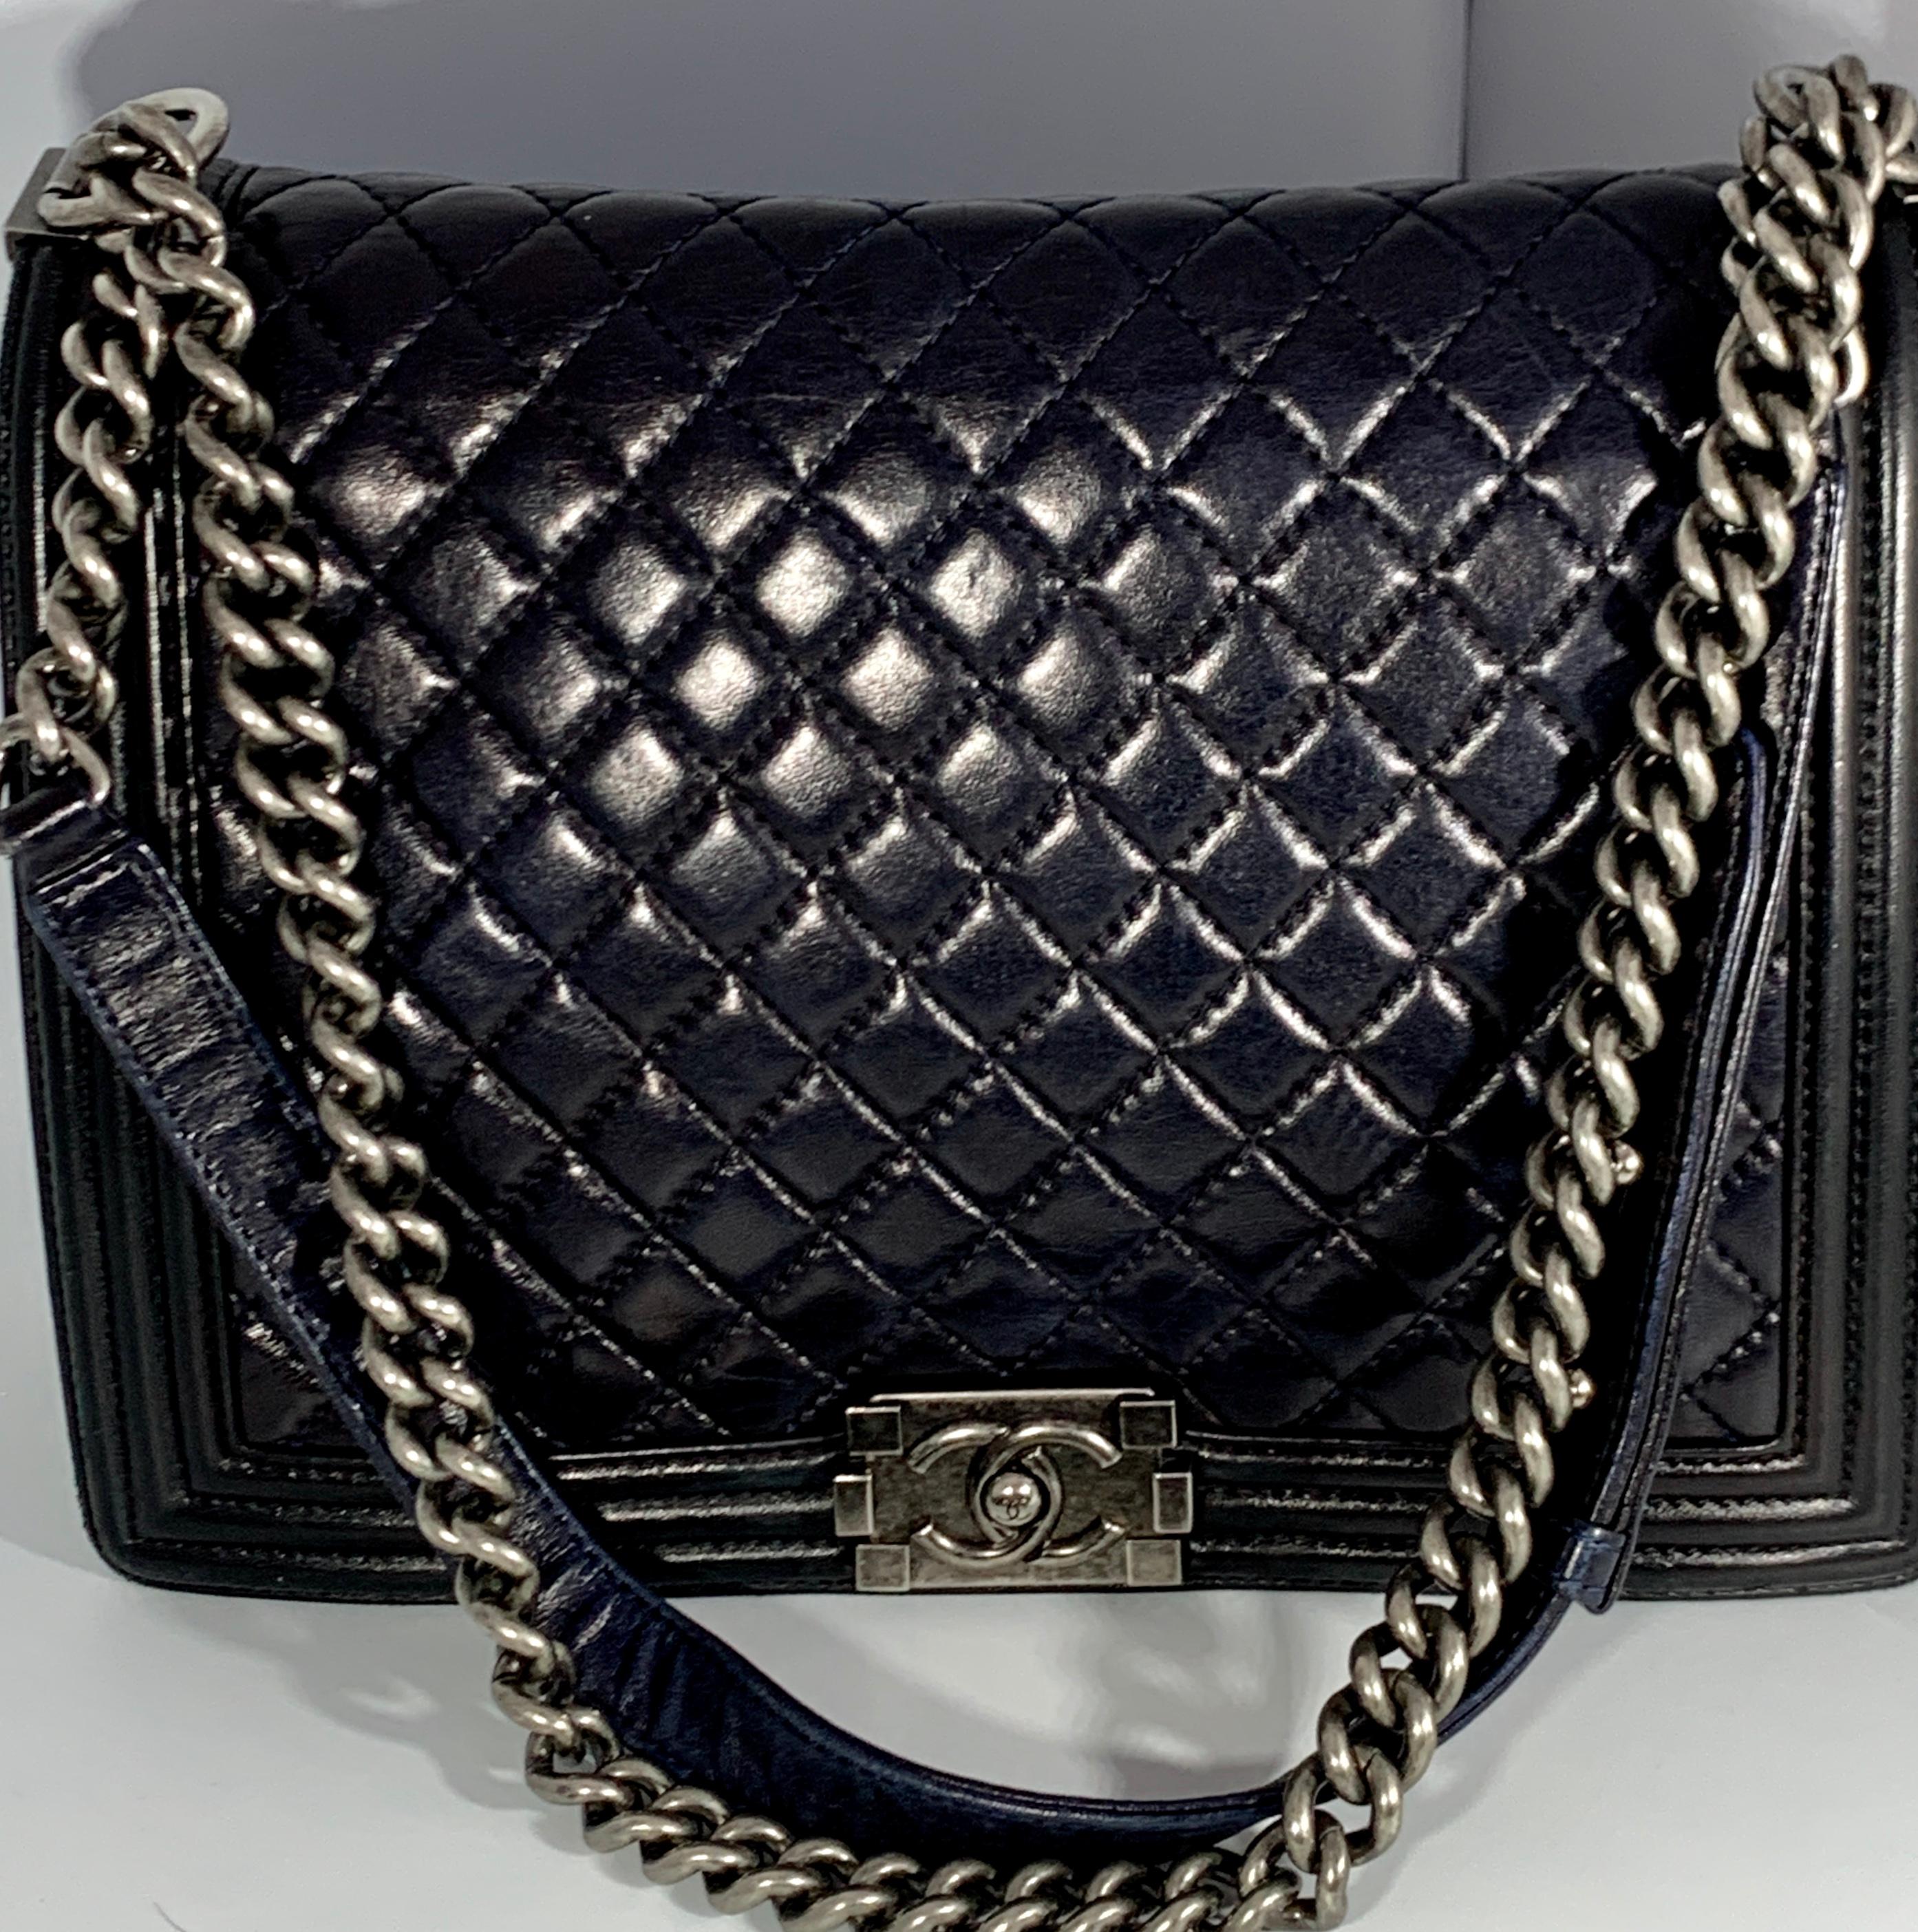 Chanel blue calfskin leather LE boy bag
 Classic quilted pattern 
aged silver hardware and clasp. 
Largest size in this style. 
Strap can be doubled or worn single cross body. Purchased directly from Chanel. Comes with dust cover
 size 12